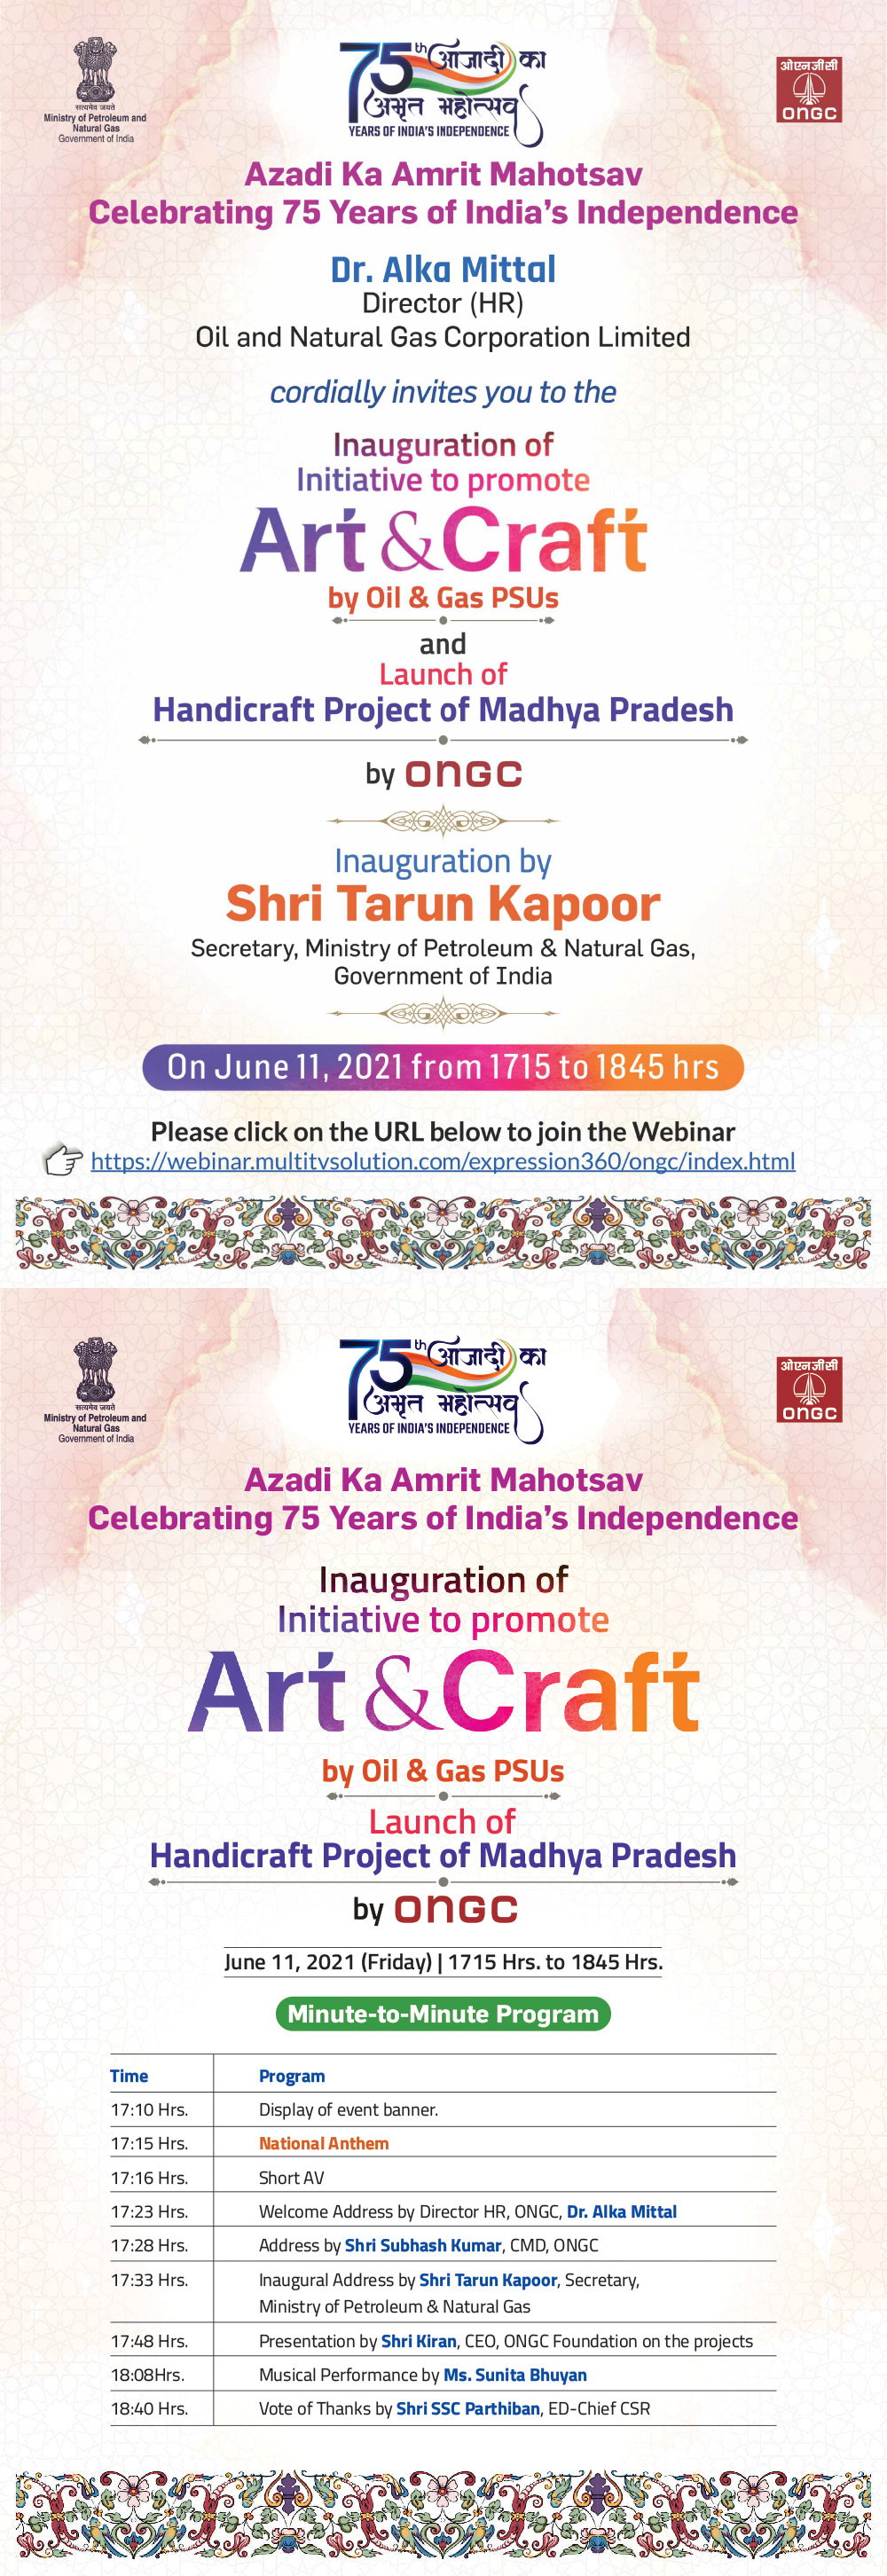 Webinar Inauguration of initiative to promote Art and Craft by Oil & Gas PSUs on 11 June 2021